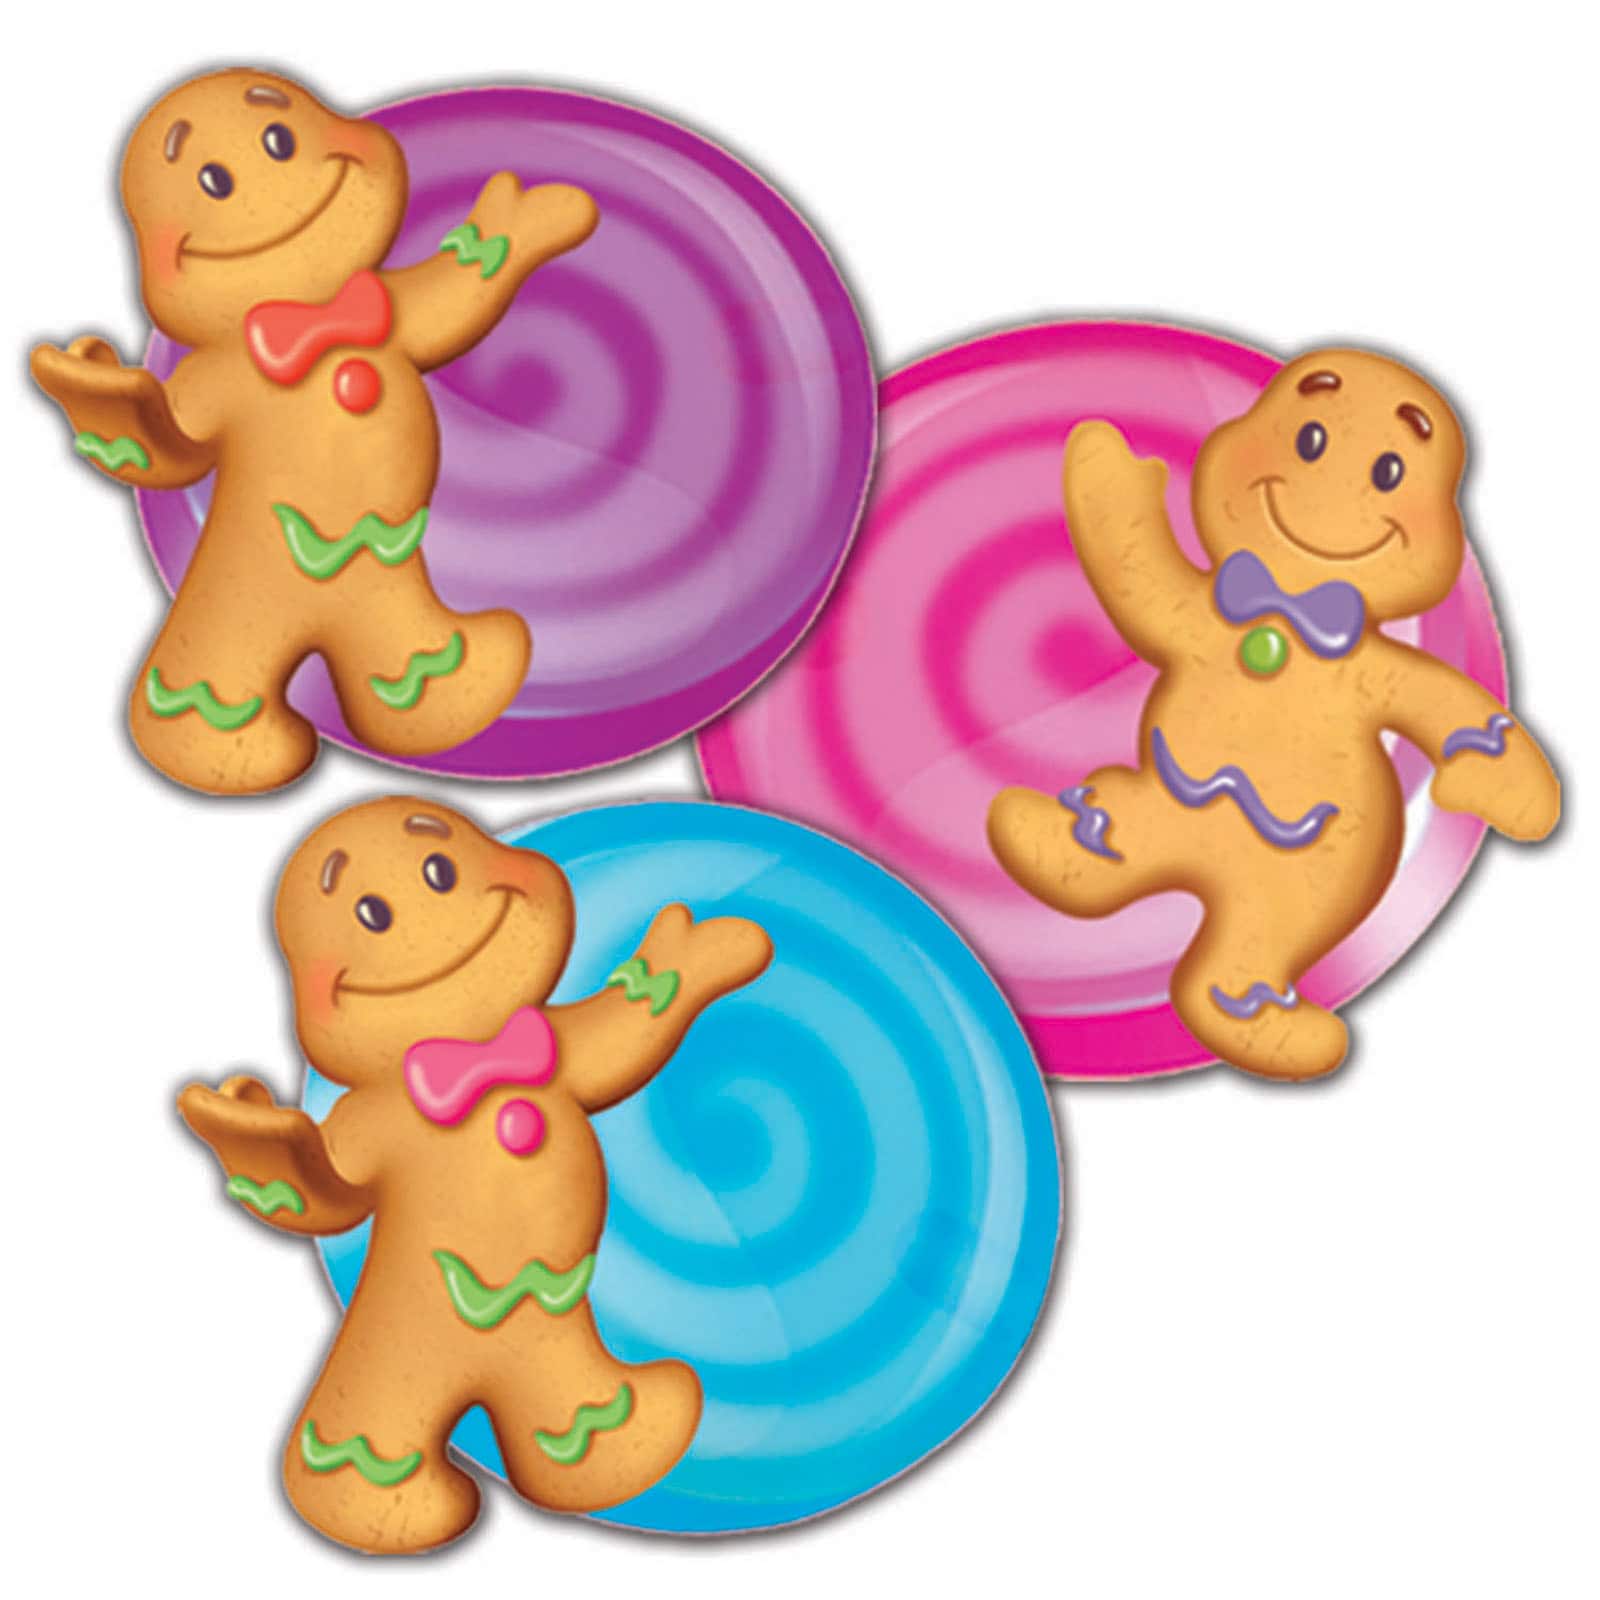 find-the-eureka-candy-land-cutouts-3-packs-of-36-at-michaels